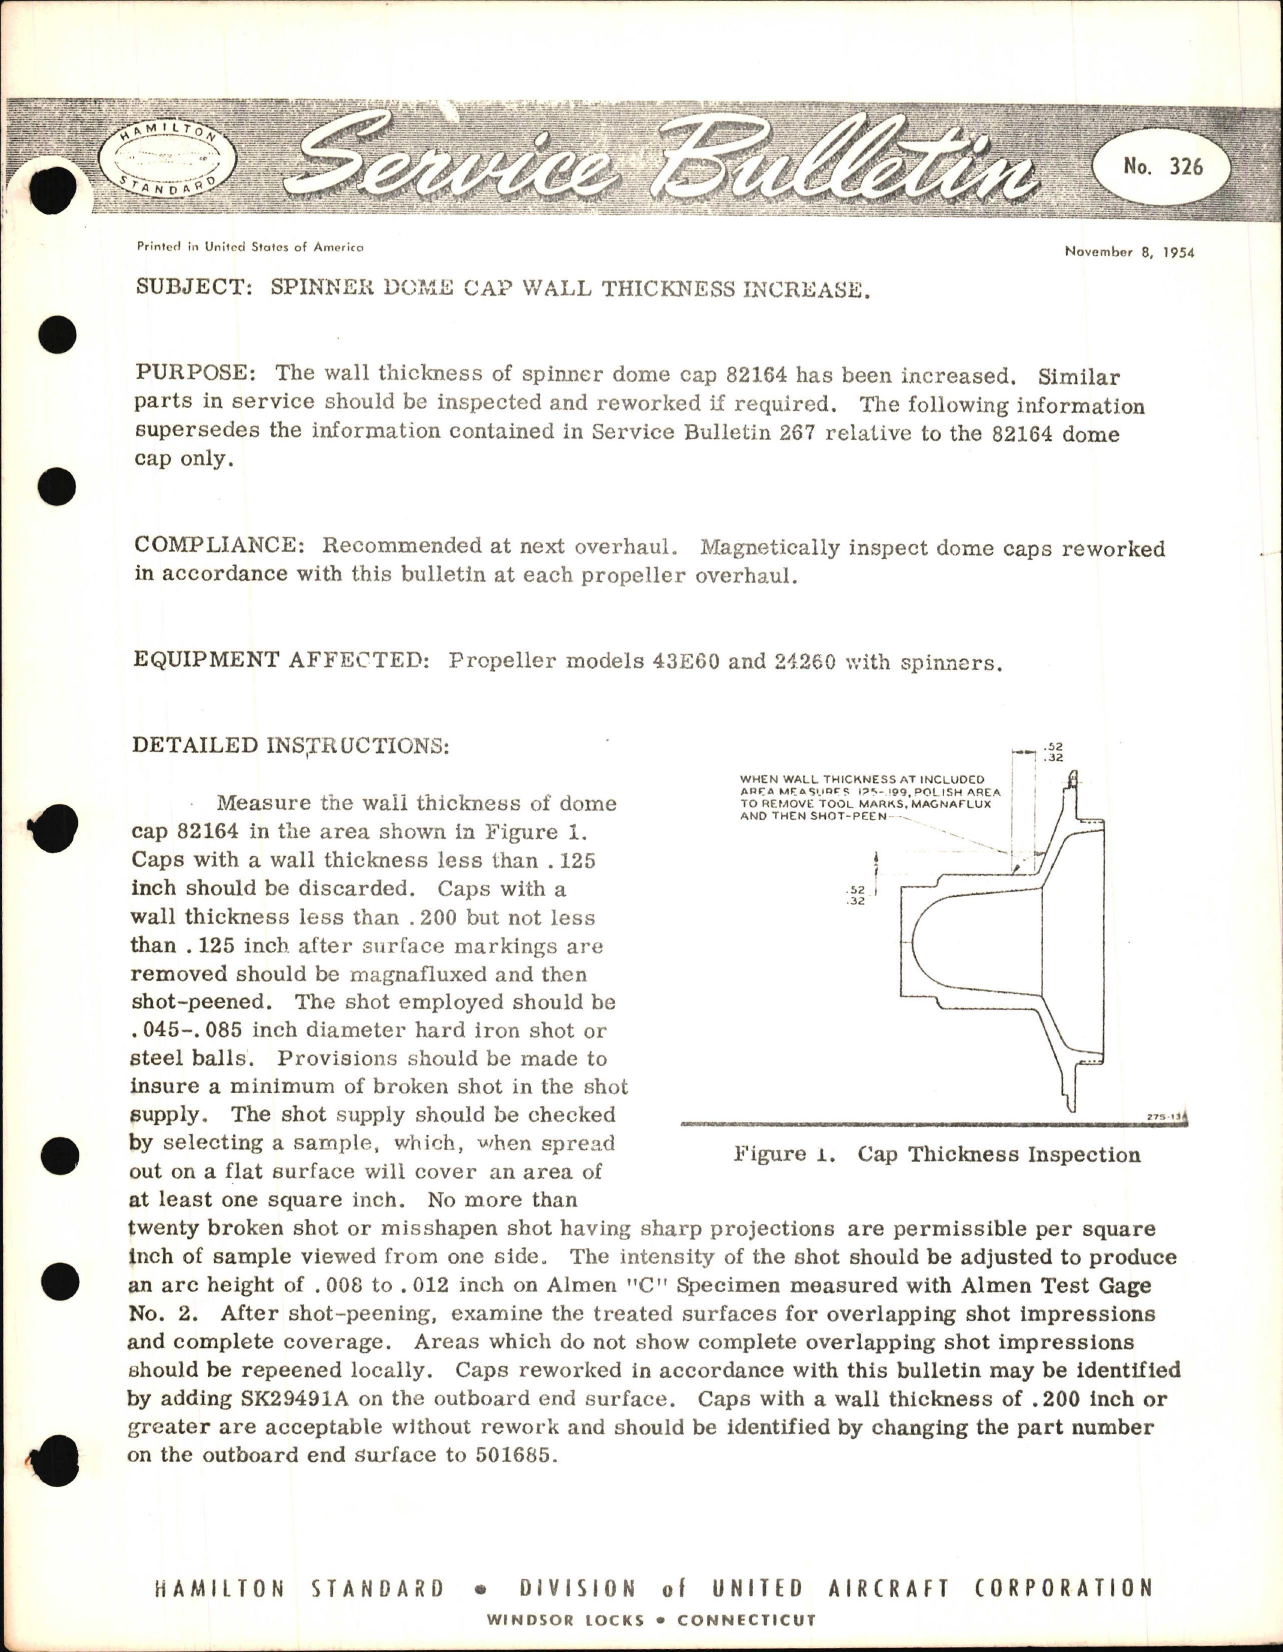 Sample page 1 from AirCorps Library document: Spinner Dome Cap Wall Thickness Increase 